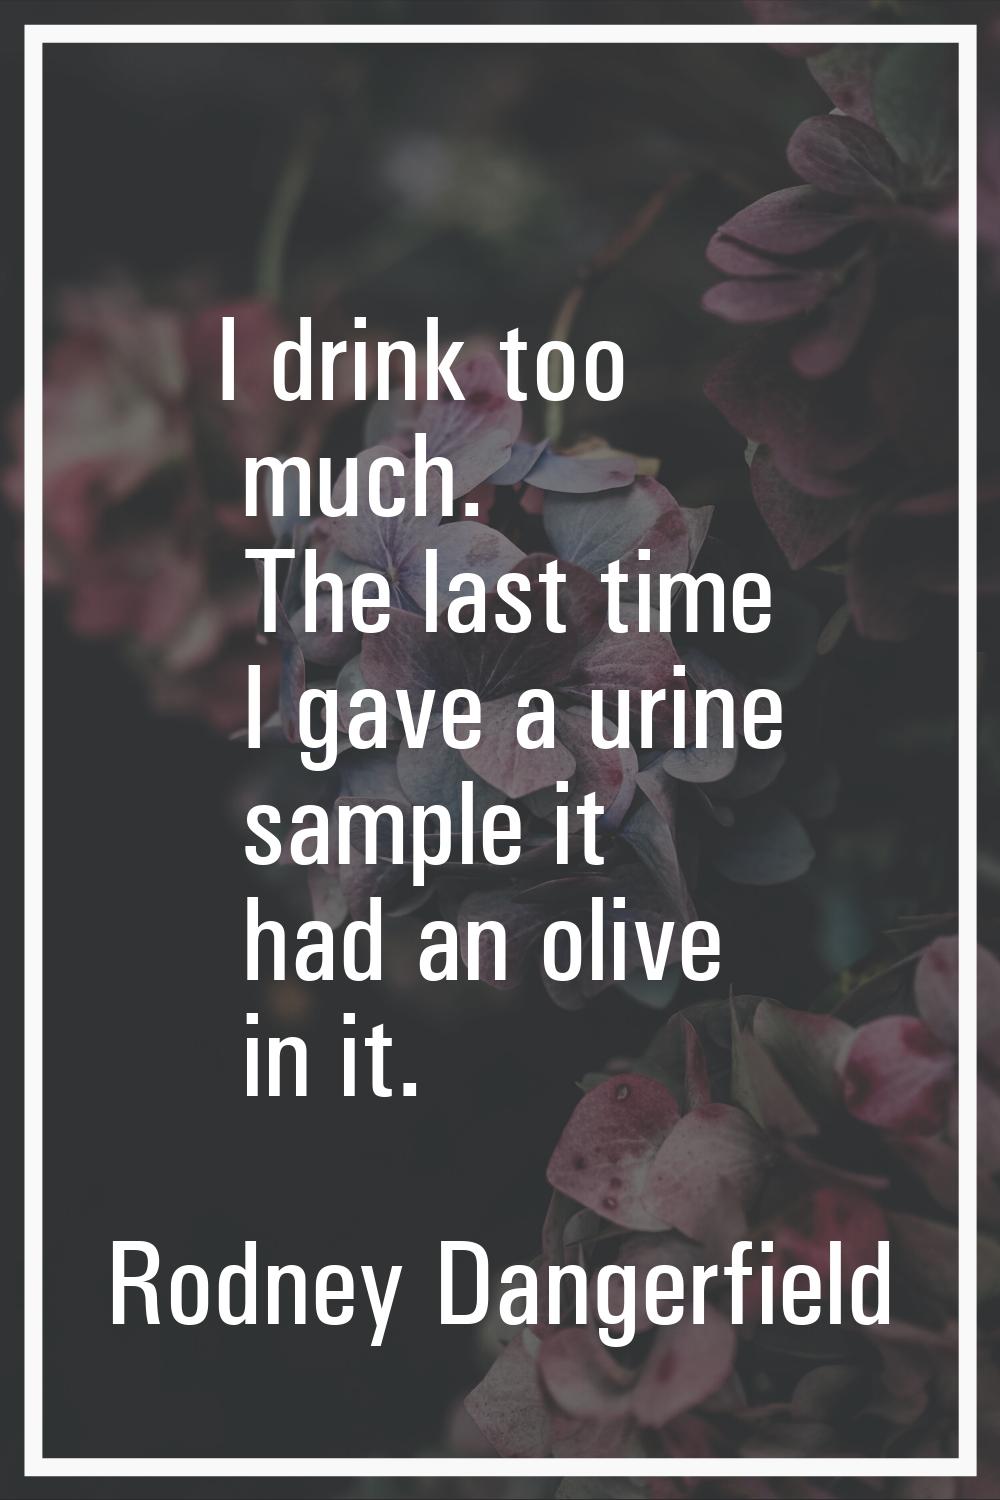 I drink too much. The last time I gave a urine sample it had an olive in it.